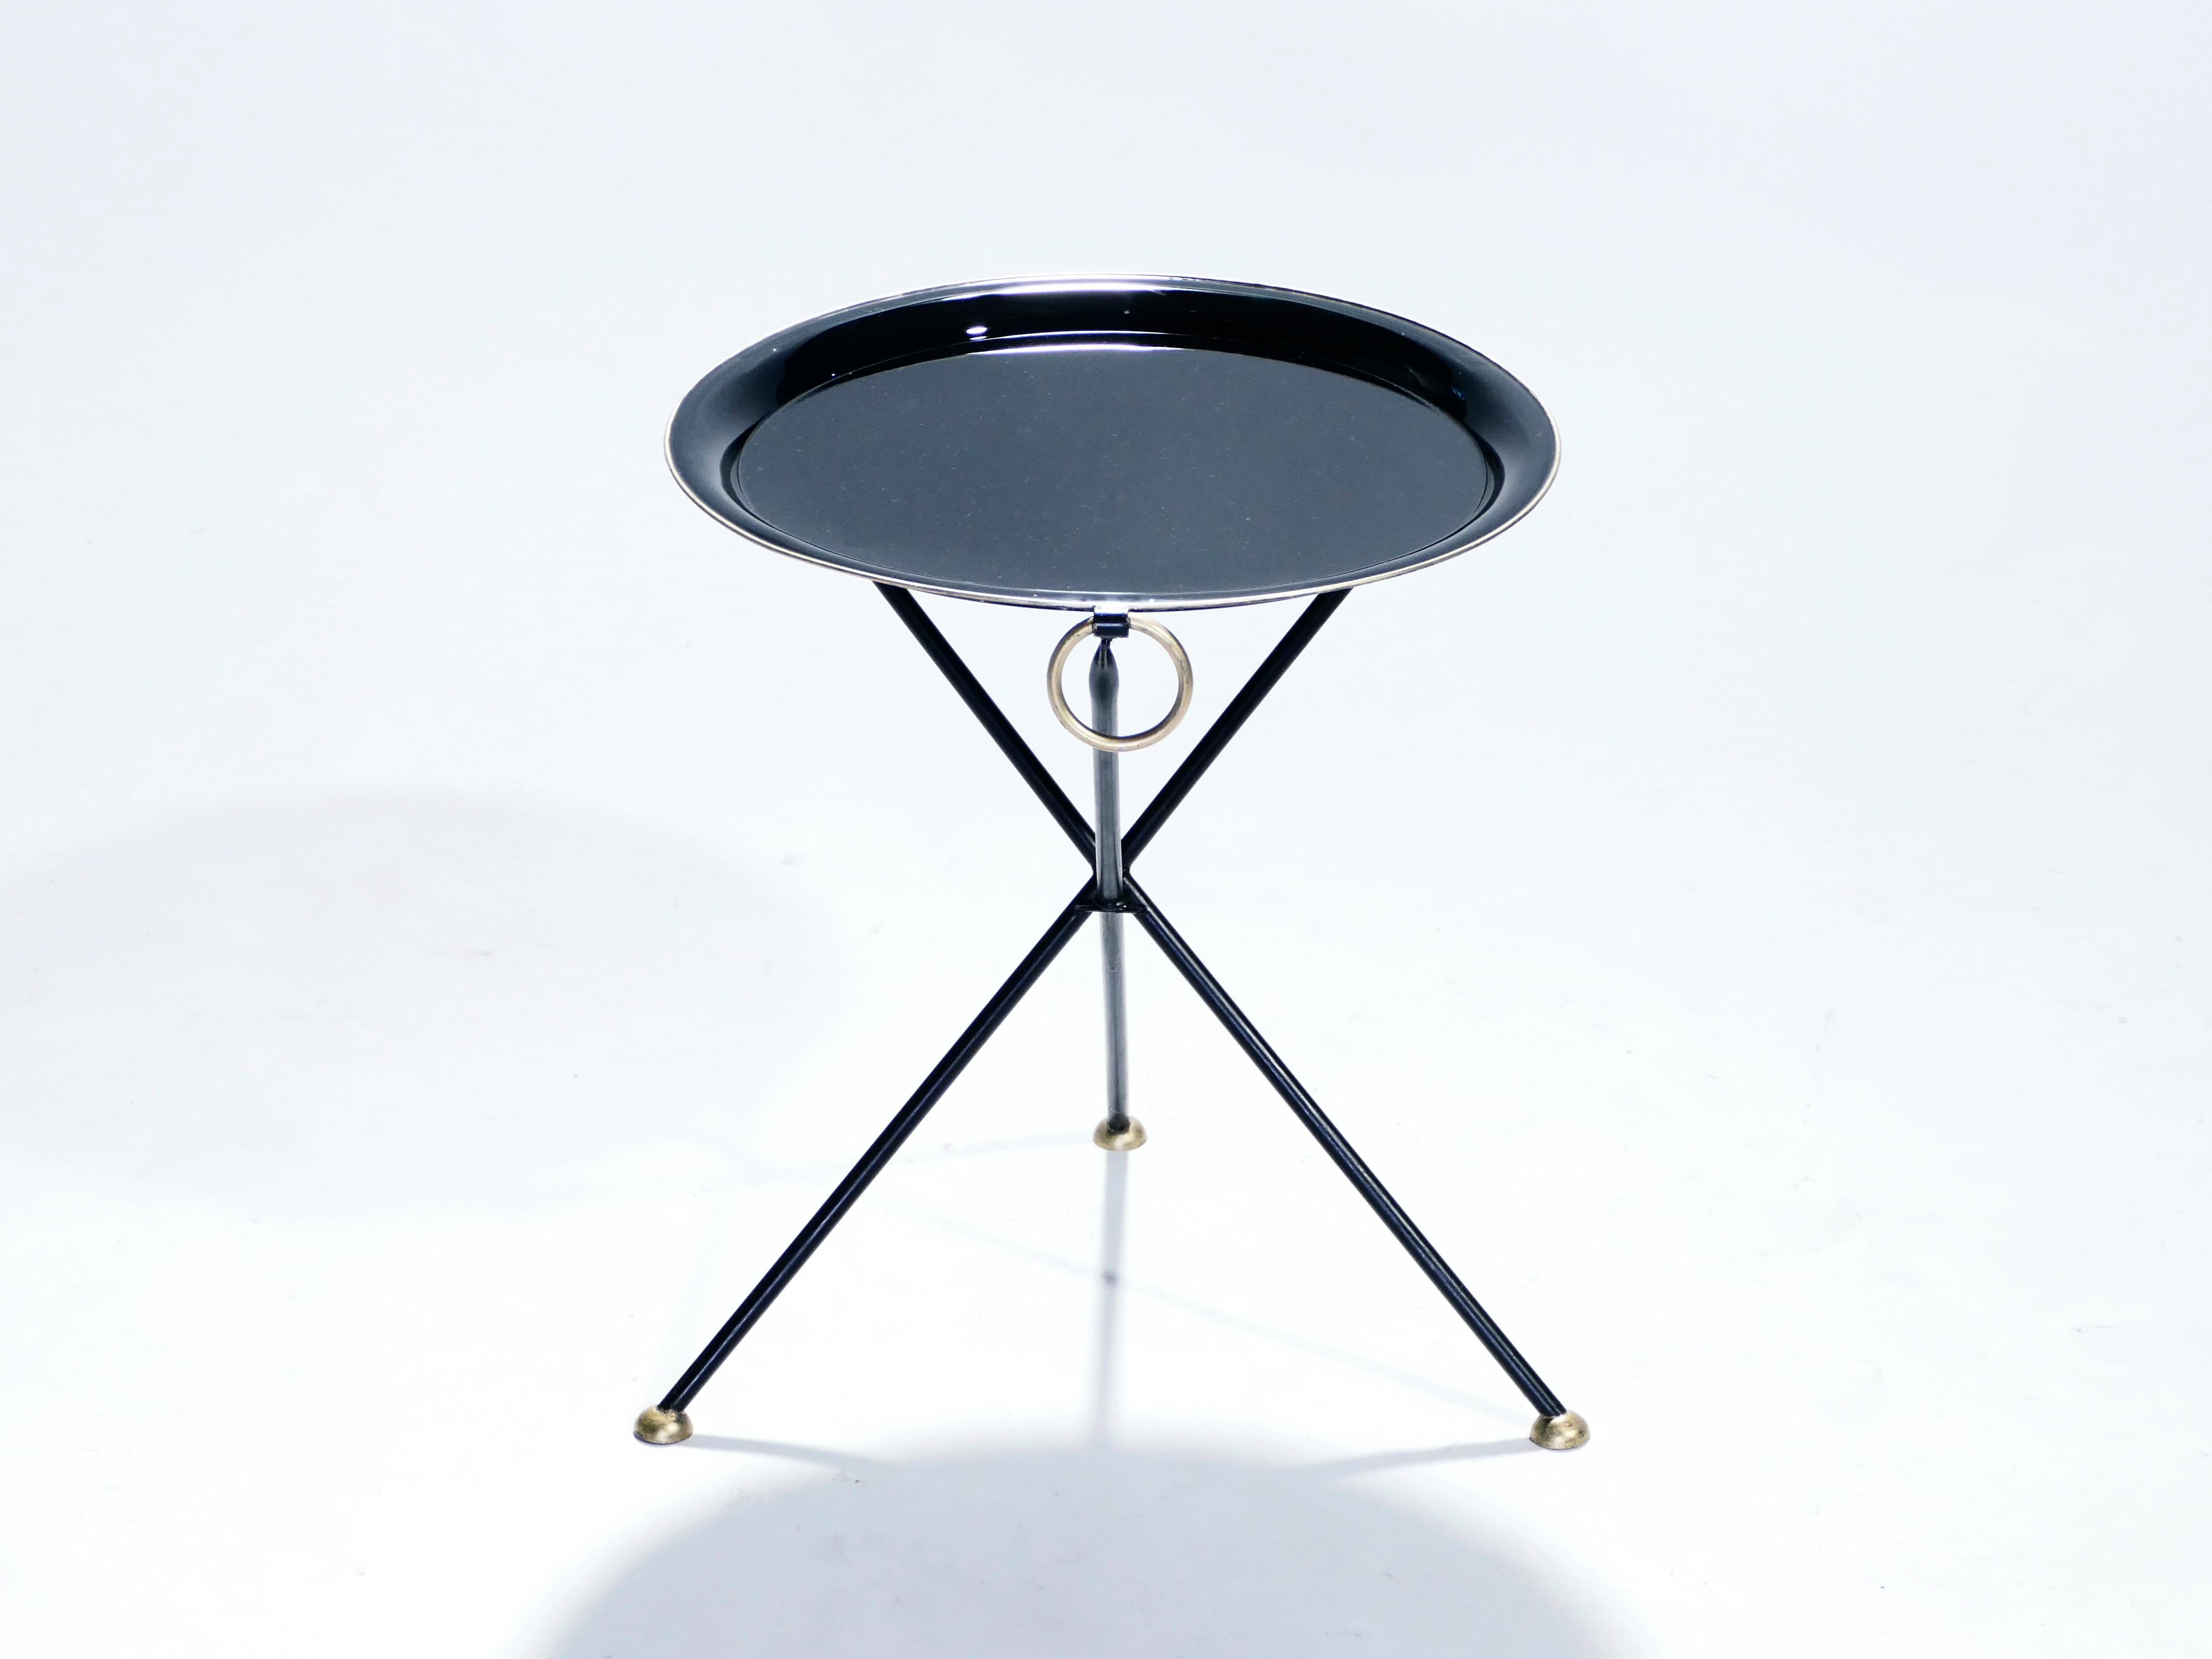 Signed by designer Christian Dior, this compact folding side table has the sleek appeal of midcentury modern design and a timeless look influenced by neoclassical style. The three black metal feet are thin and minimalistic, crossing over each other,